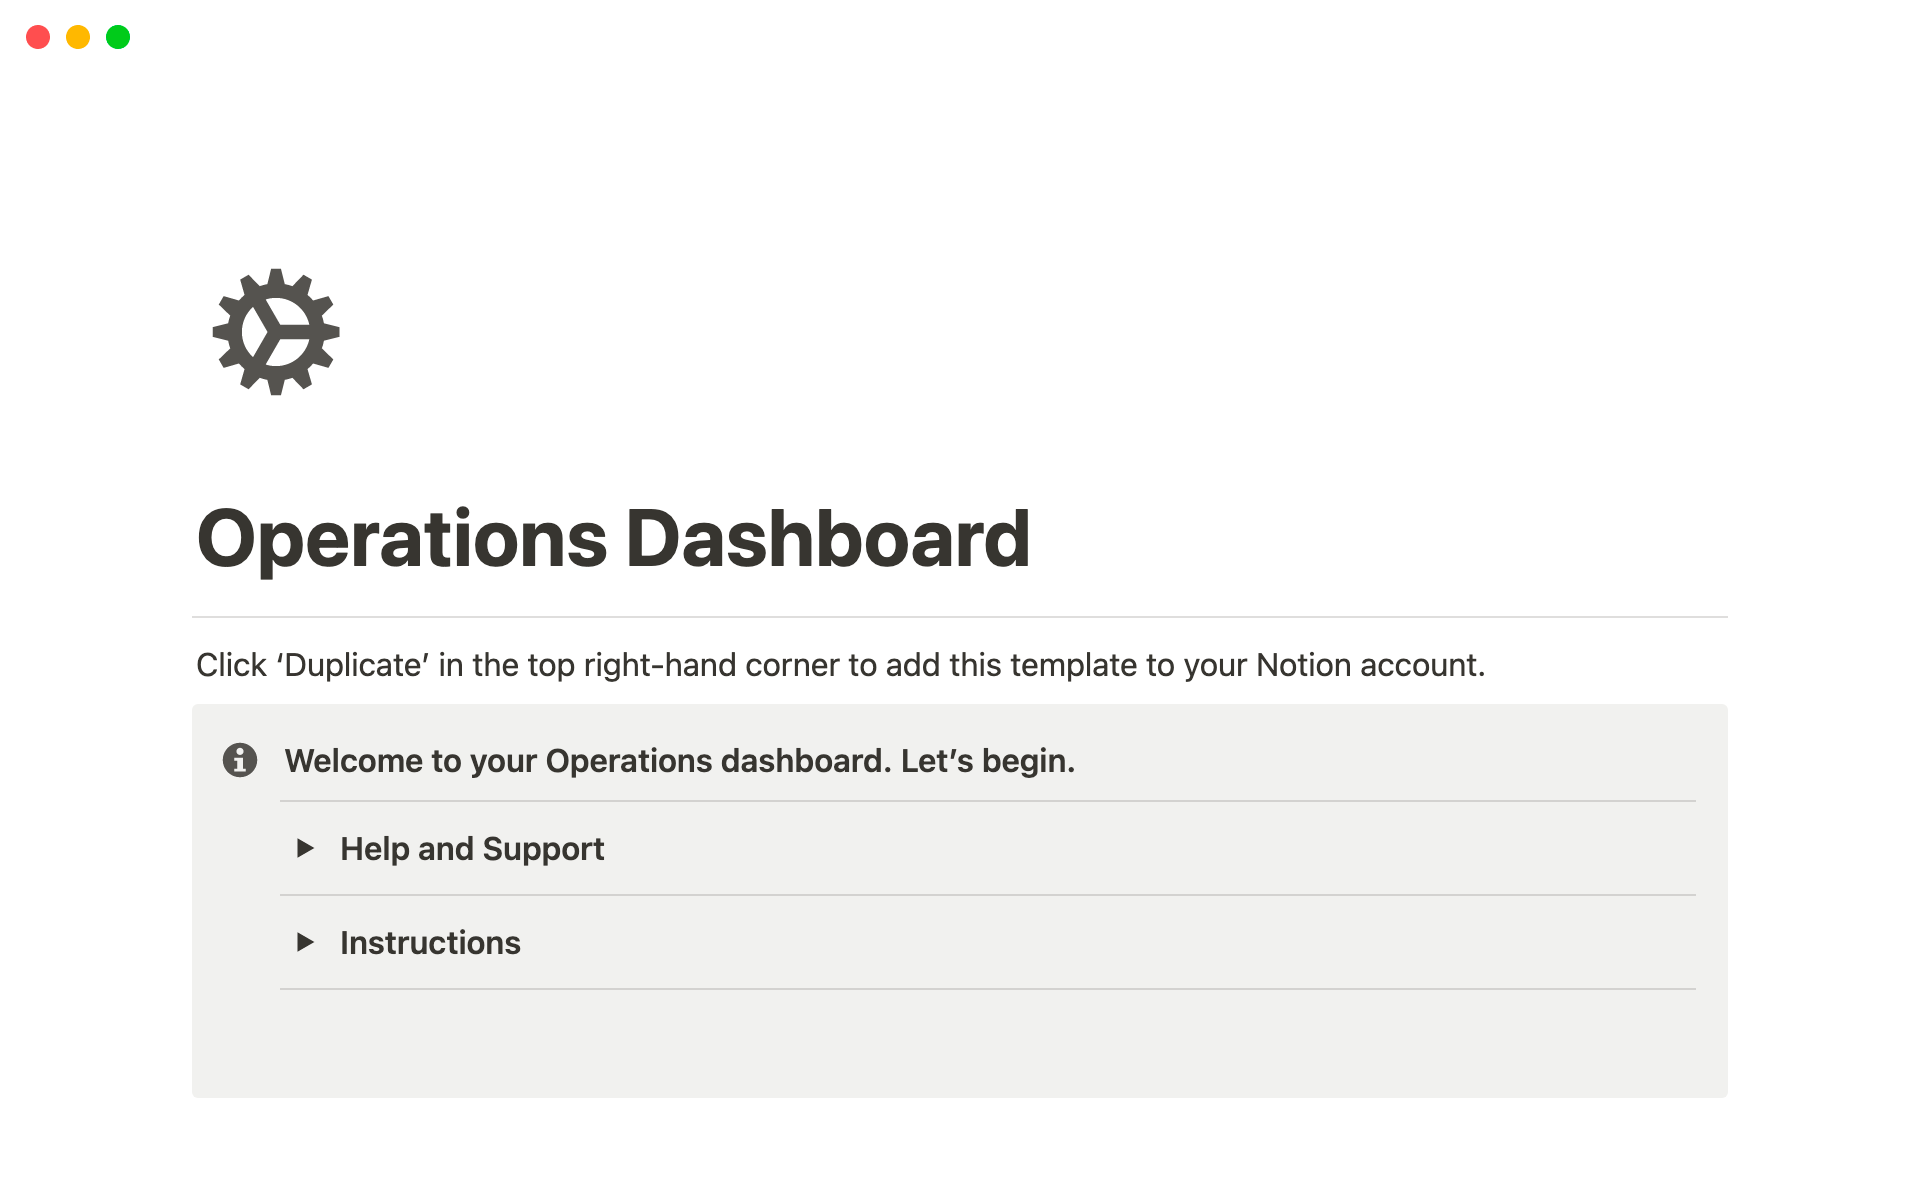 This operations dashboard allows freelancers and service providers manage all of their operations (Team, SOPS, Documentation, Tools, Scorecard),  in one place.